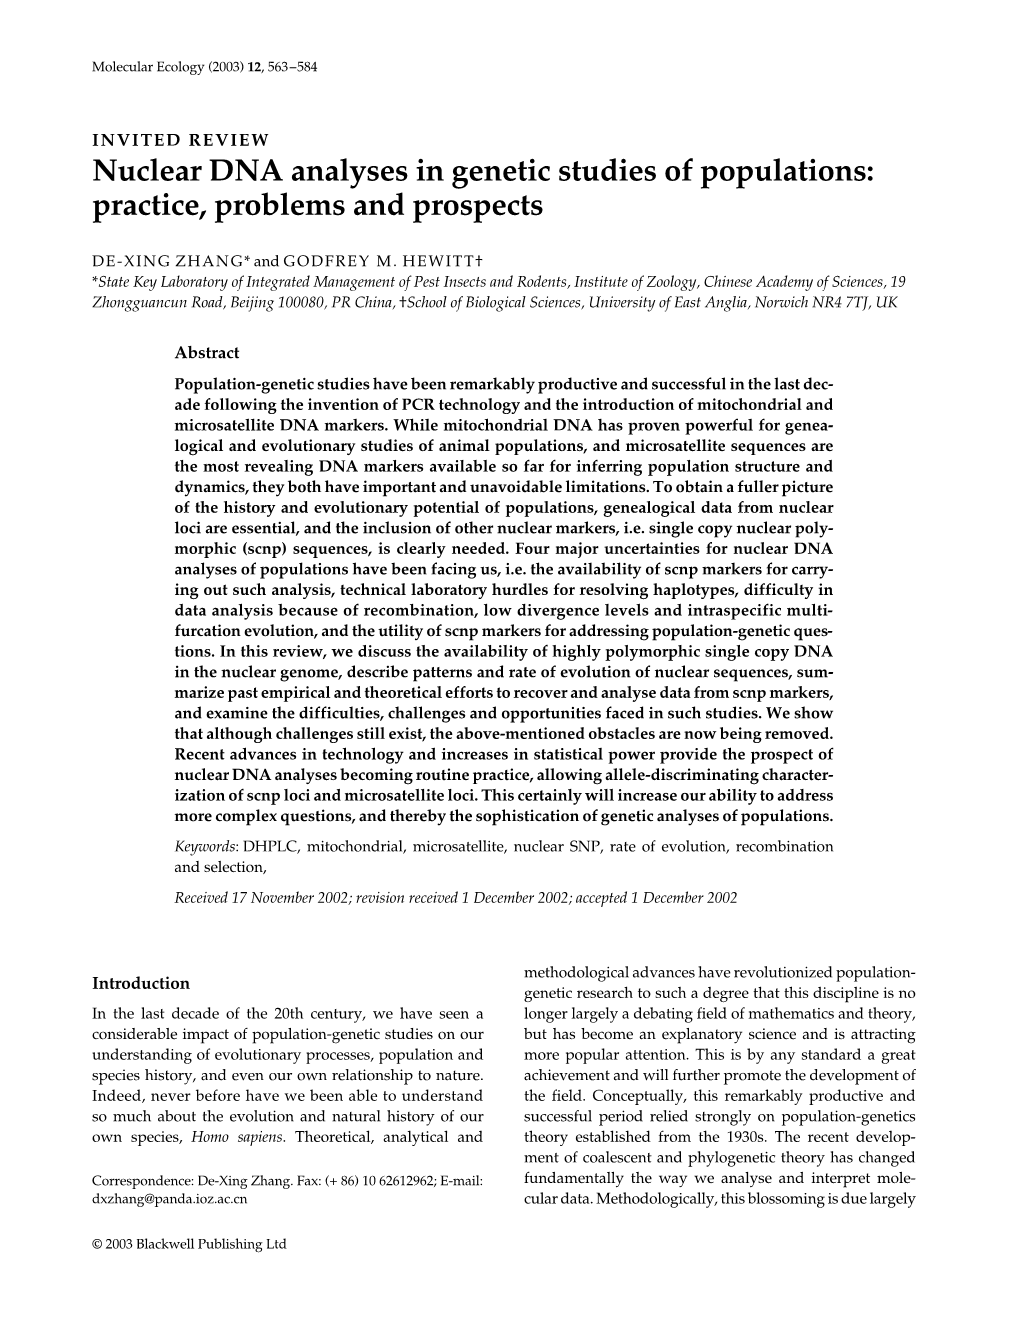 Nuclear DNA Analyses in Genetic Studies of Populations: Practice, Problems and Prospects